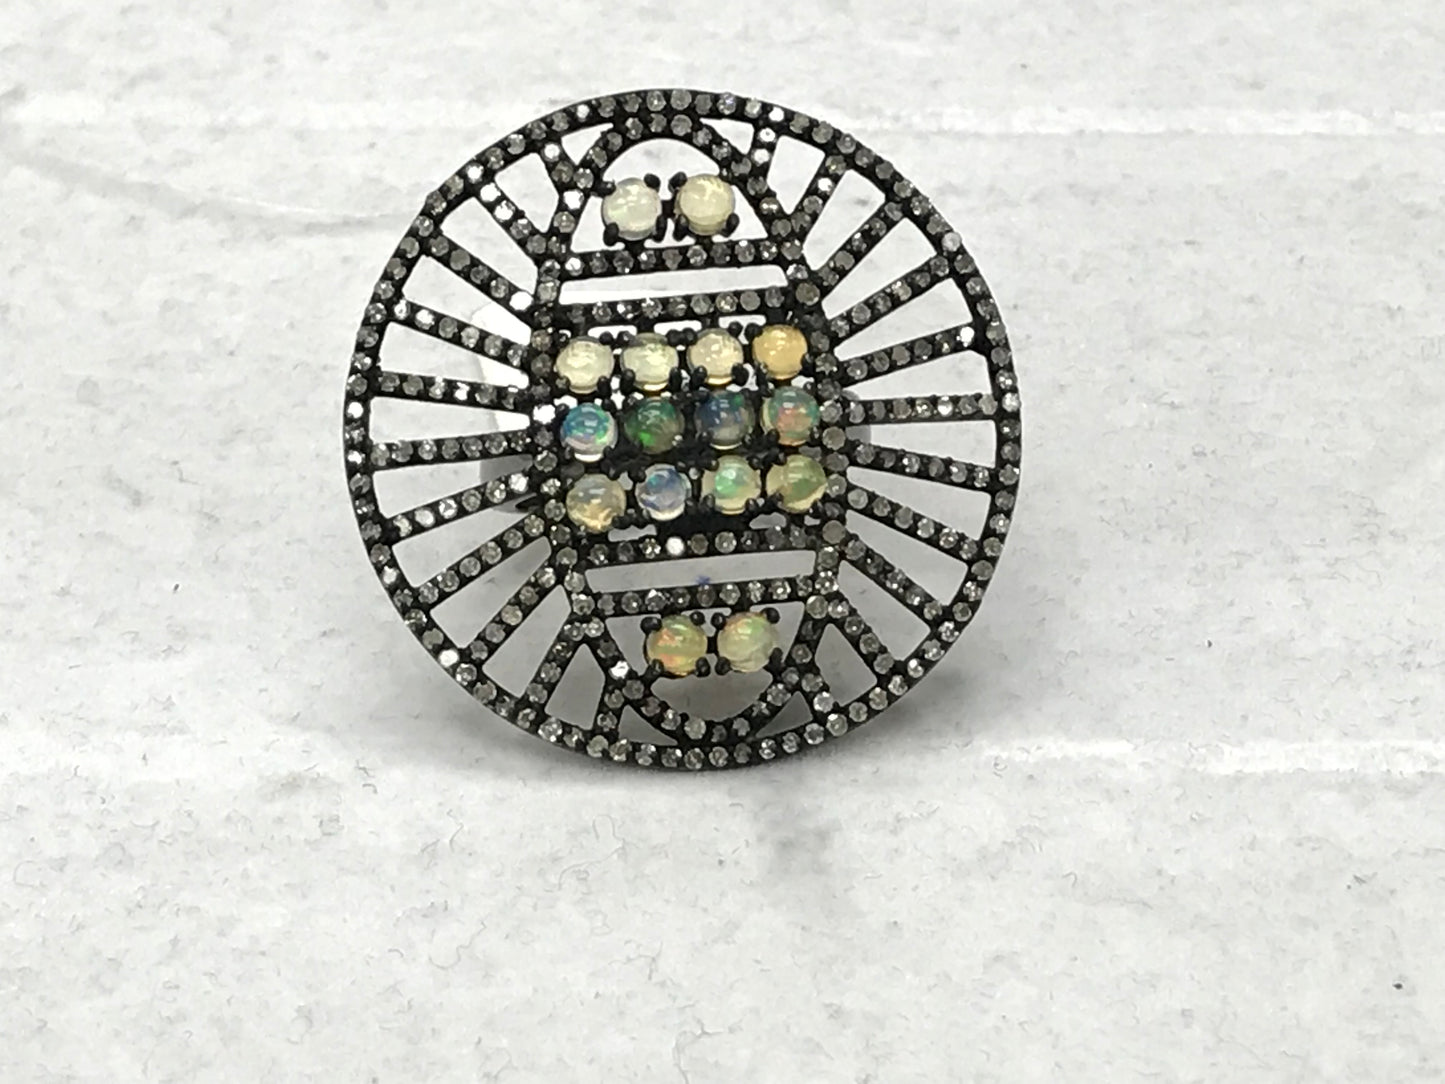 Round Shape Diamond And Natural Sleeping Beauty Turquoise Rings Pave Diamond Ring,Diamond Ring,Pave Ring, Statement Ring, Oxidized Silver